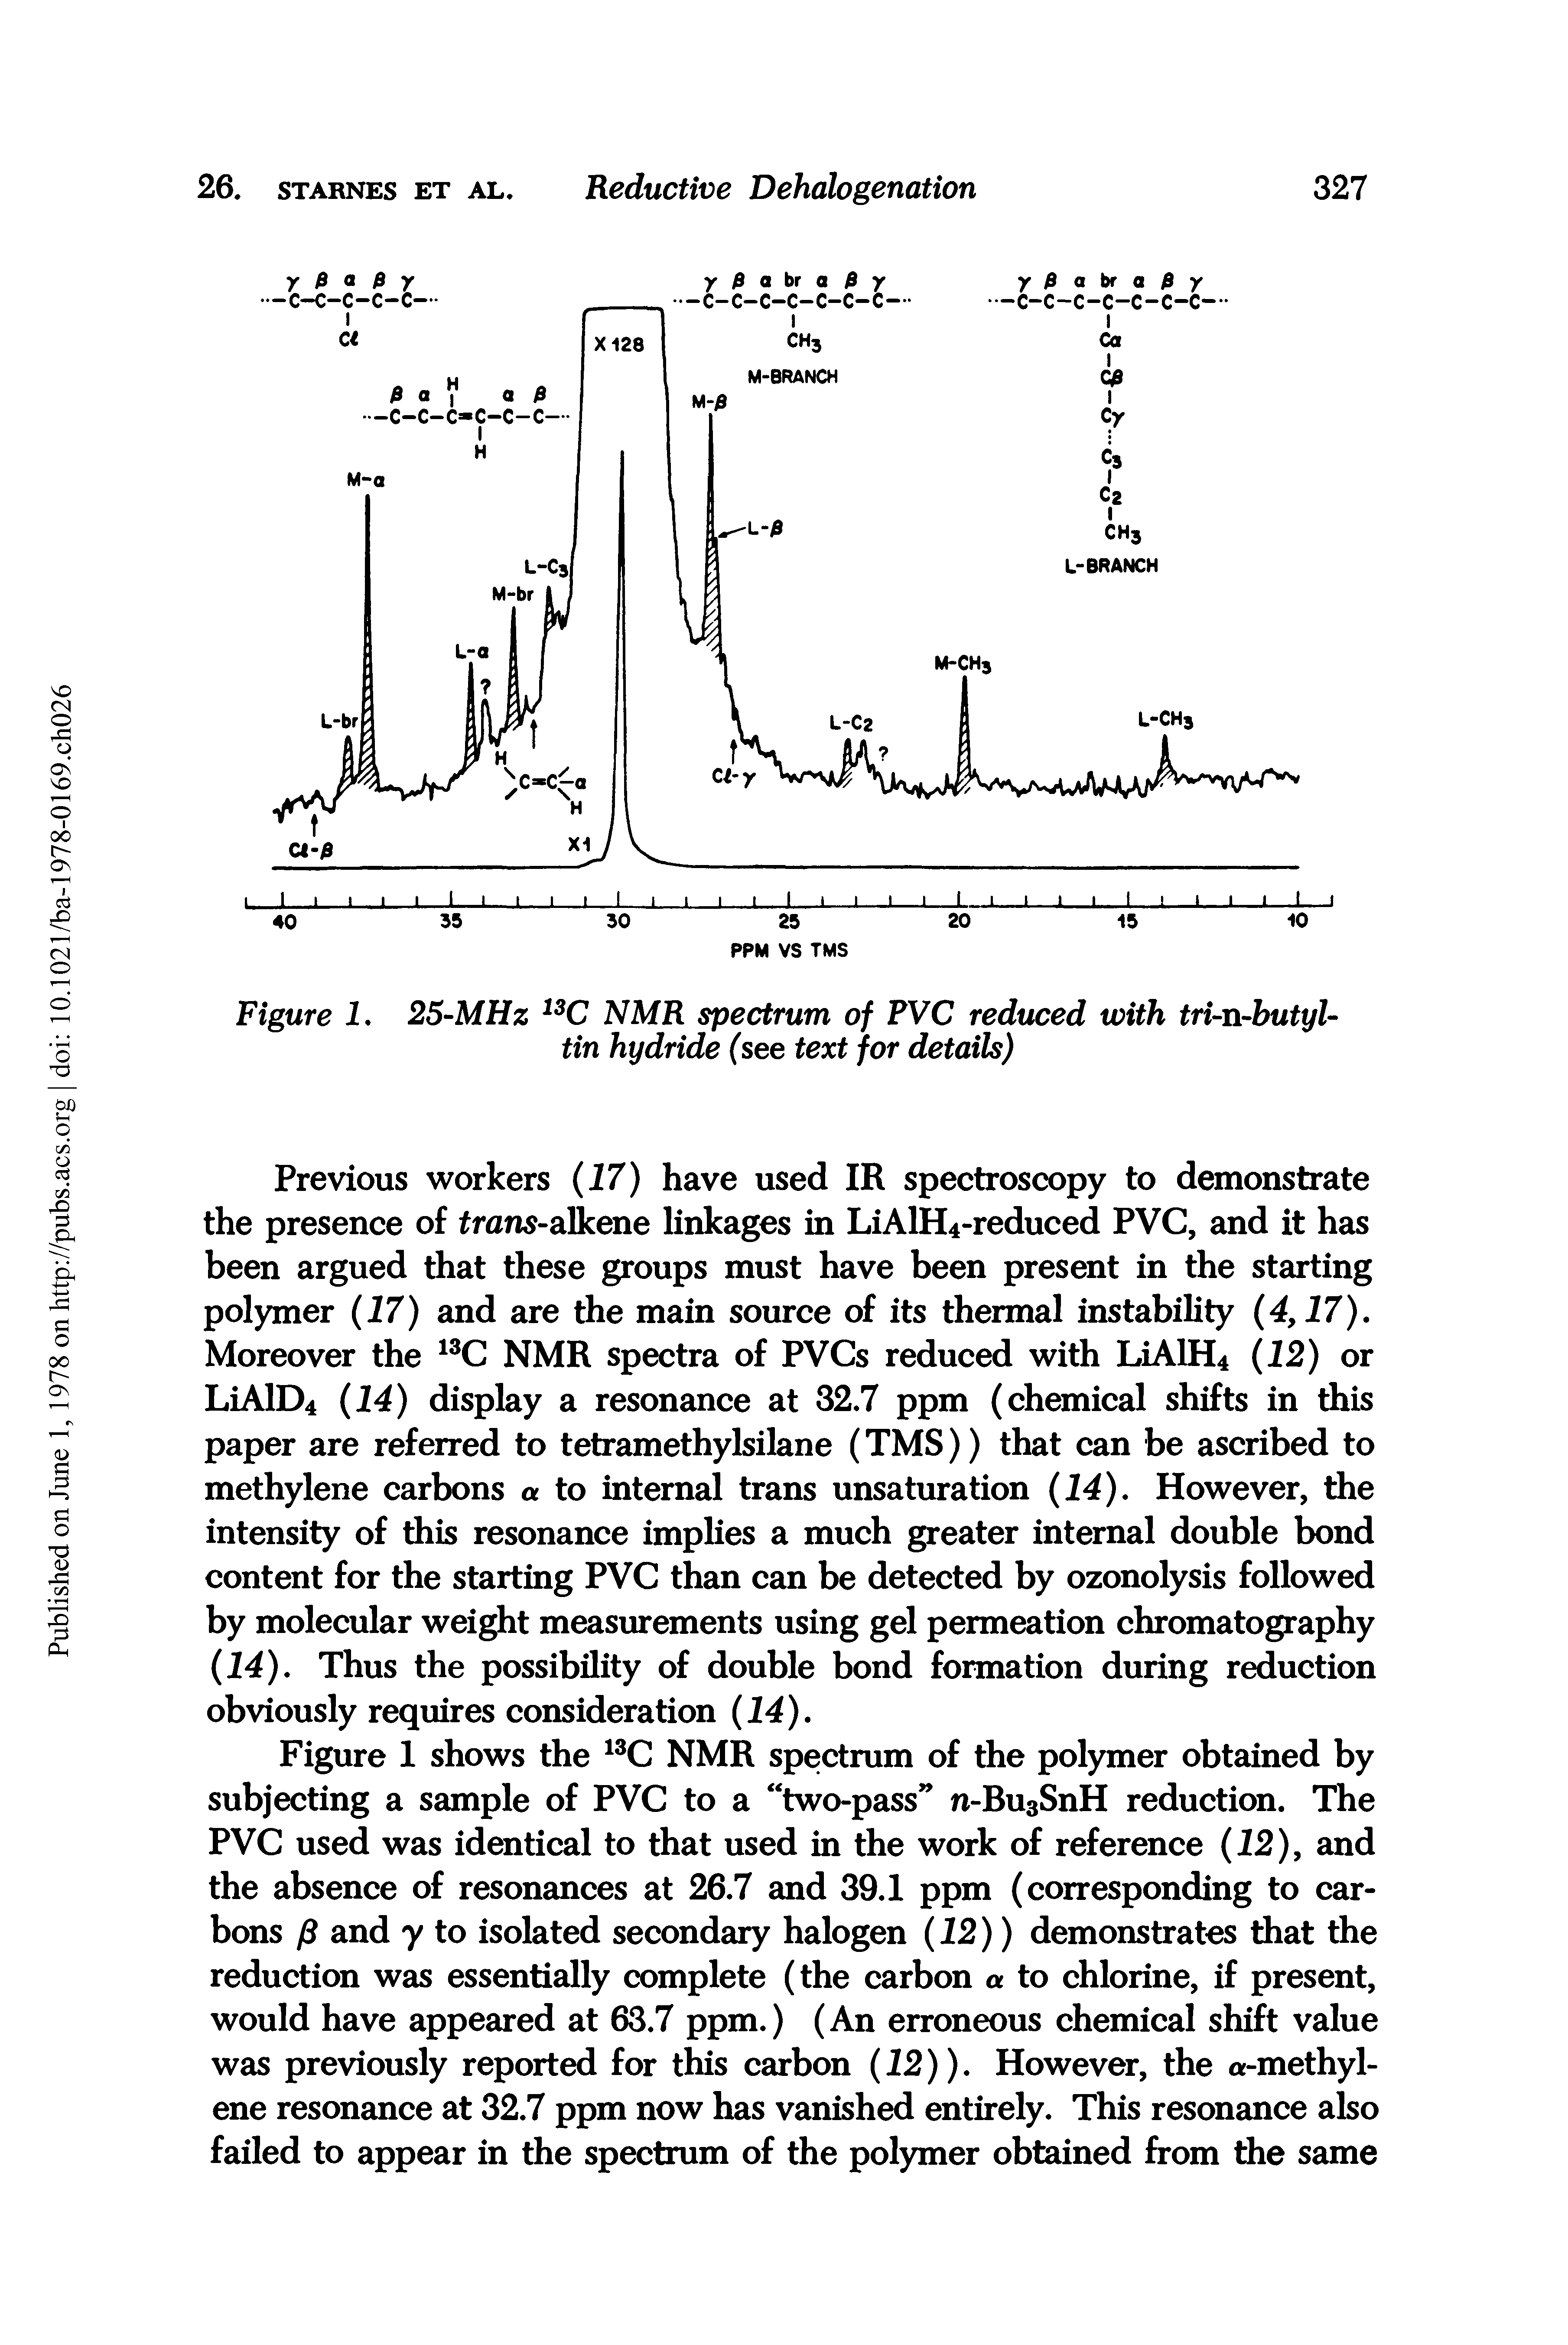 Figure 1. 25-MHz 13C NMR spectrum of FVC reduced with tri-n-butyl-tin hydride (see text for details)...